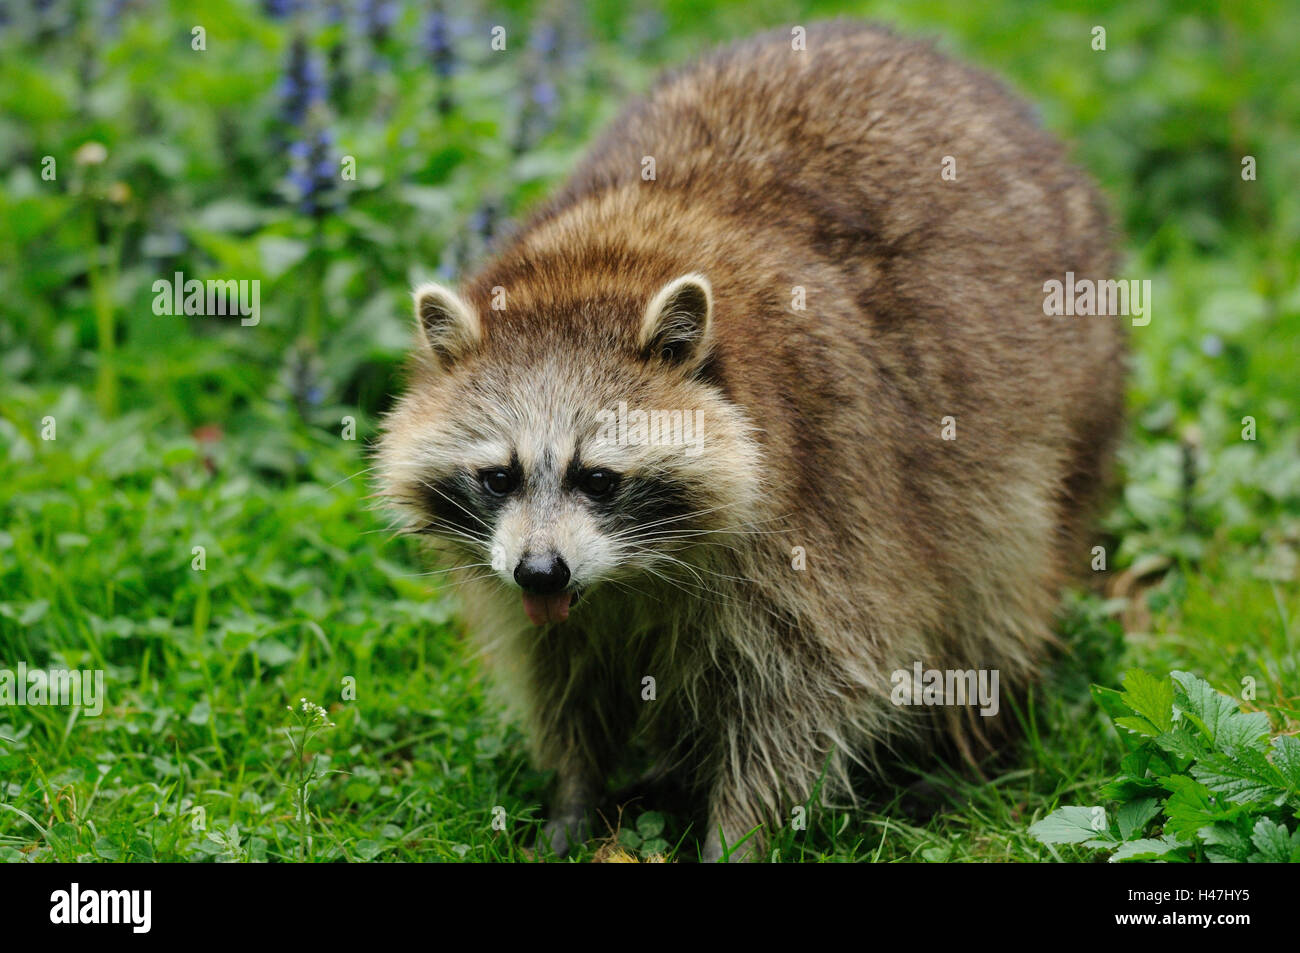 Racoon, Procyon lotor, meadow, frontale, debout, looking at camera, Banque D'Images